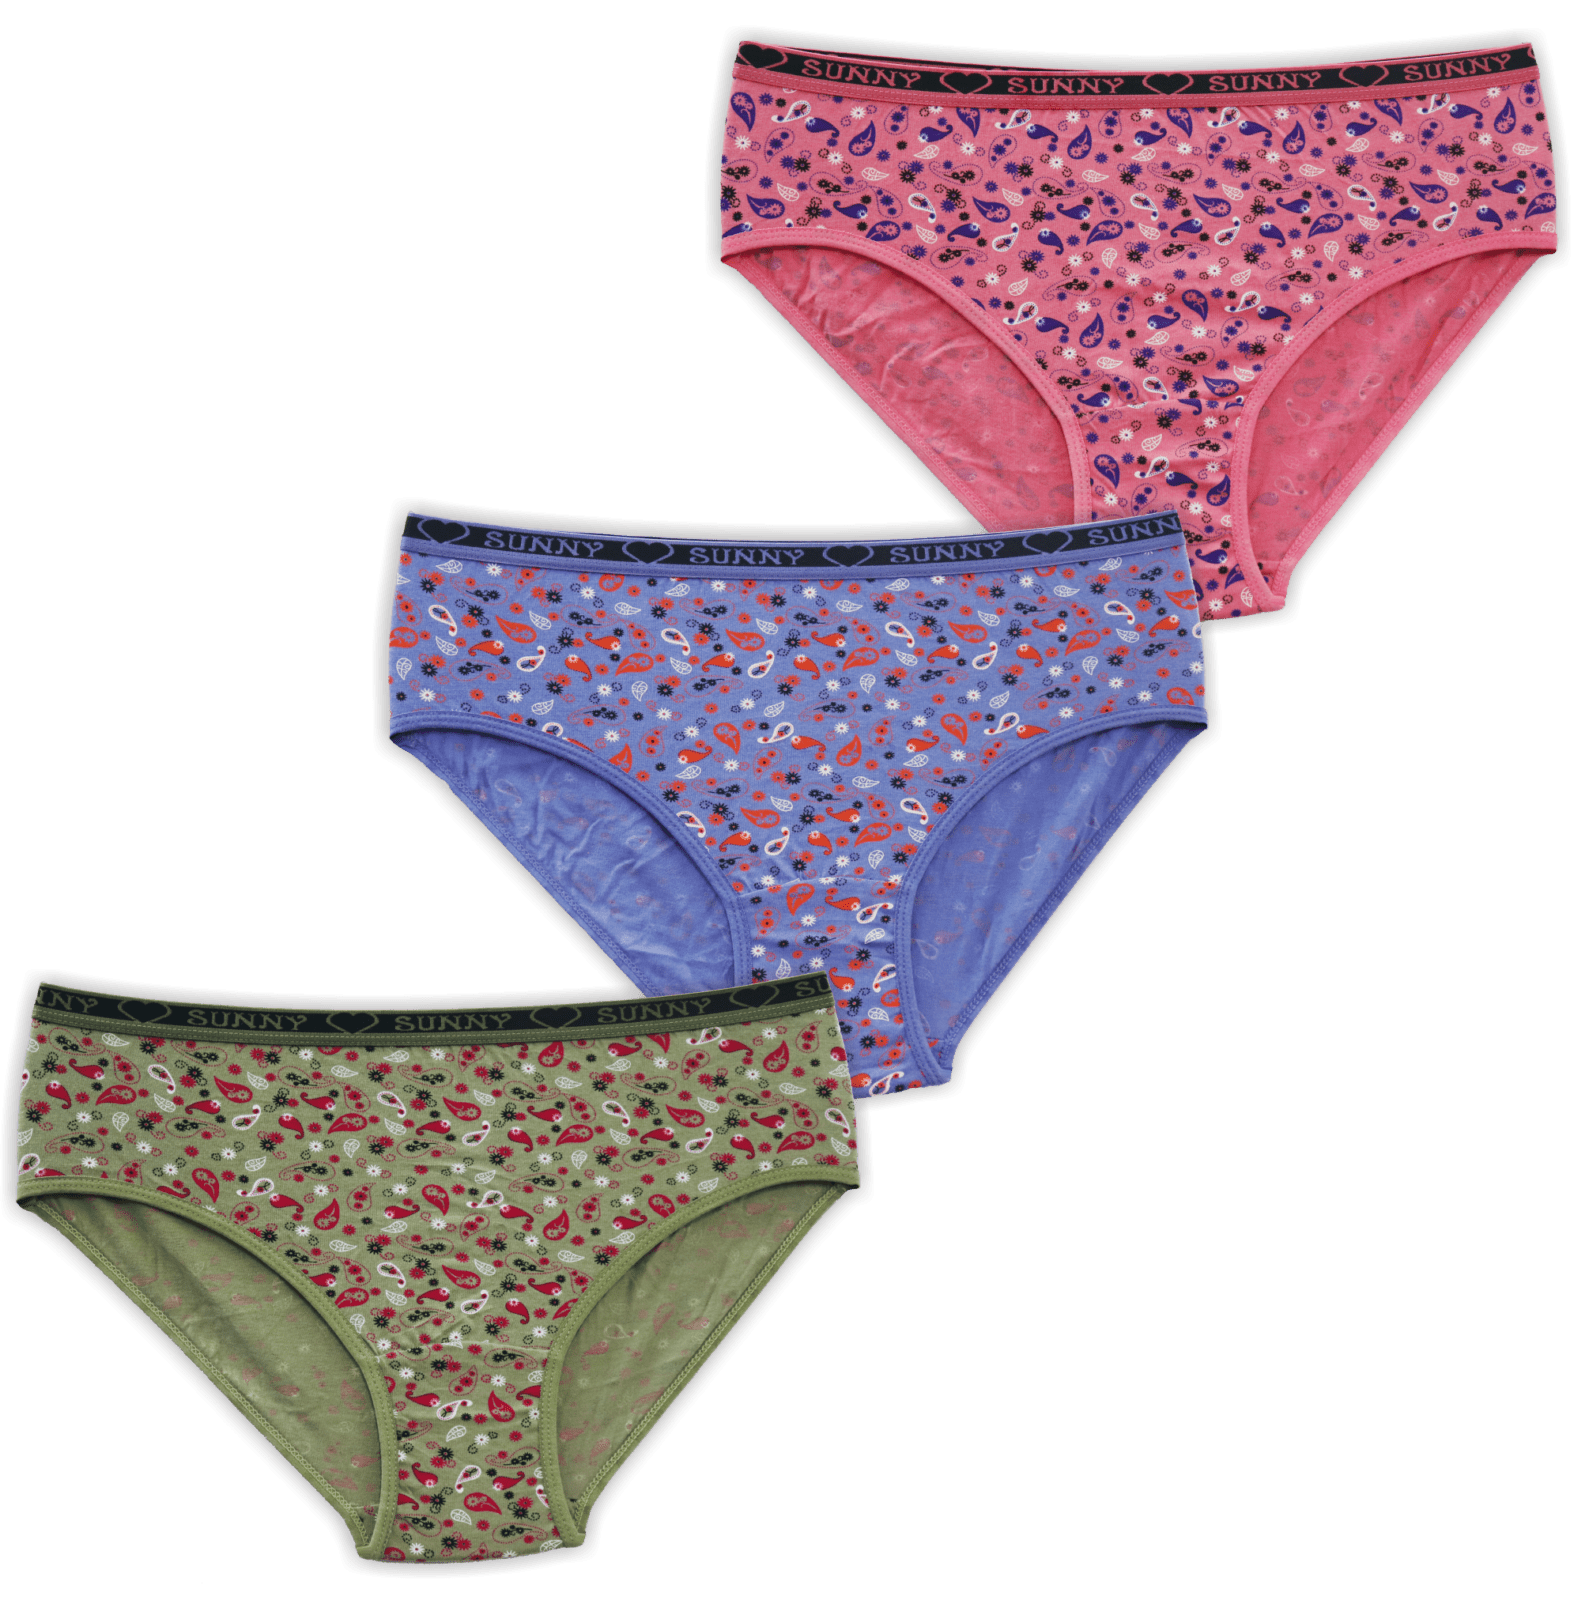 Sunny Lingerie's Ladies panties give the best comfort an